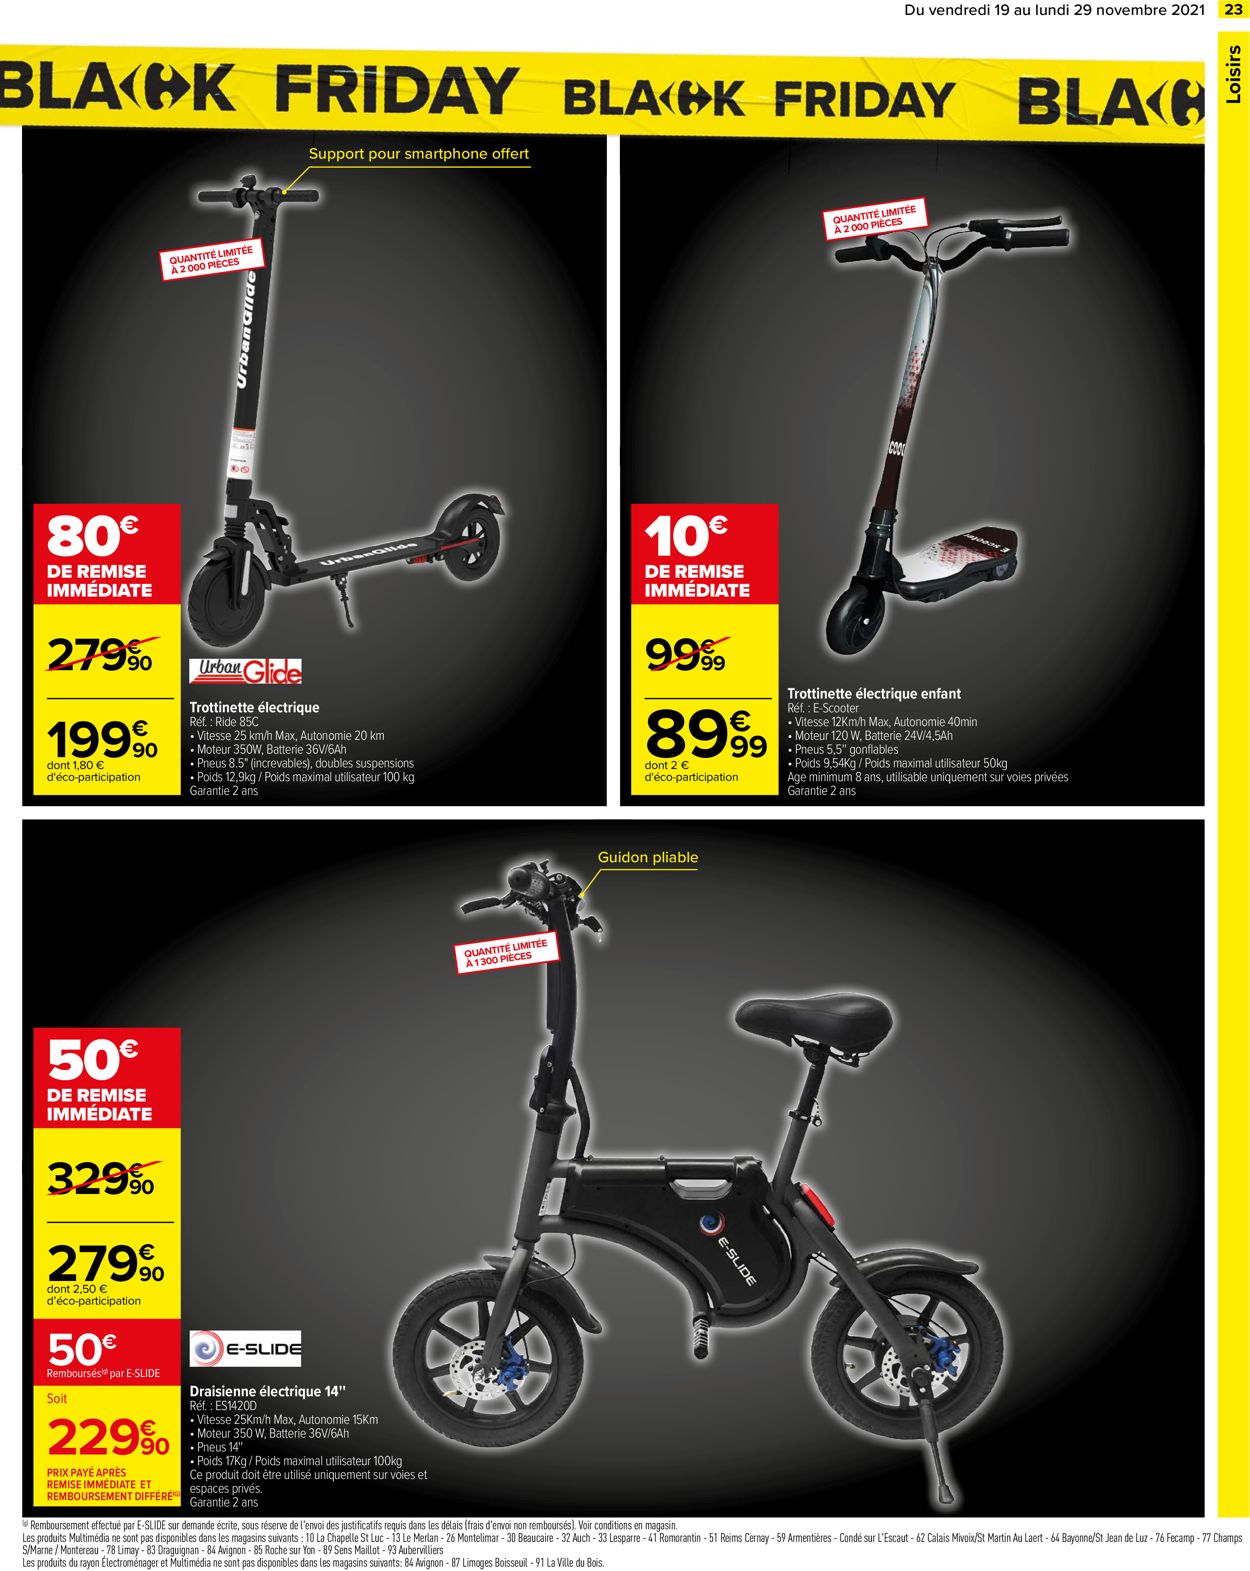 Carrefour BLACK WEEK 2021 Catalogue - 19.11-29.11.2021 (Page 23)